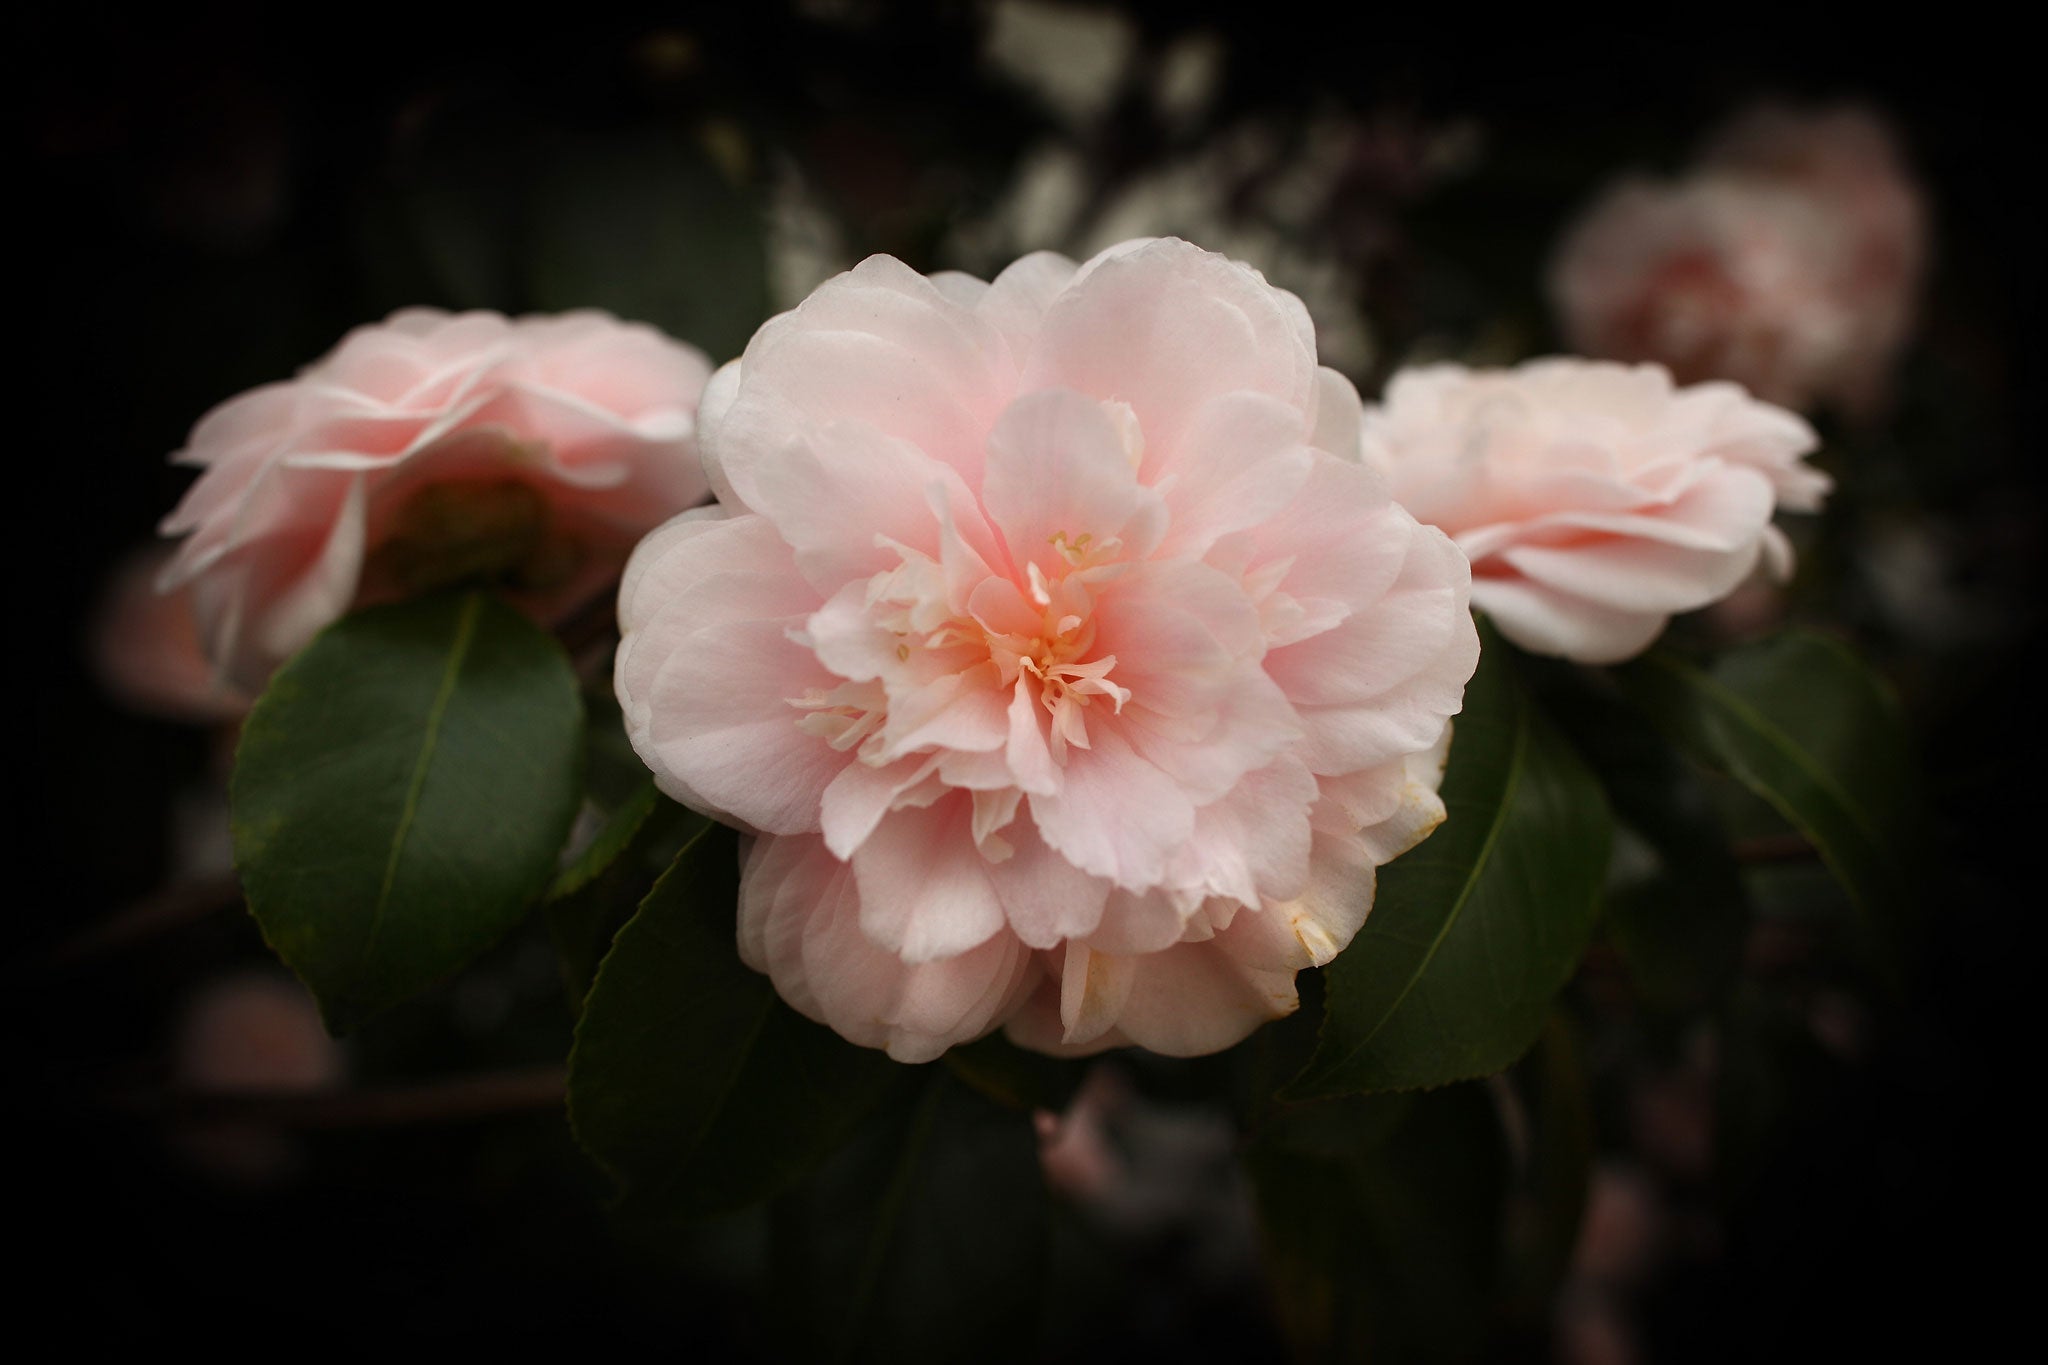 Camellia flower buds are being initiated now for next spring's display